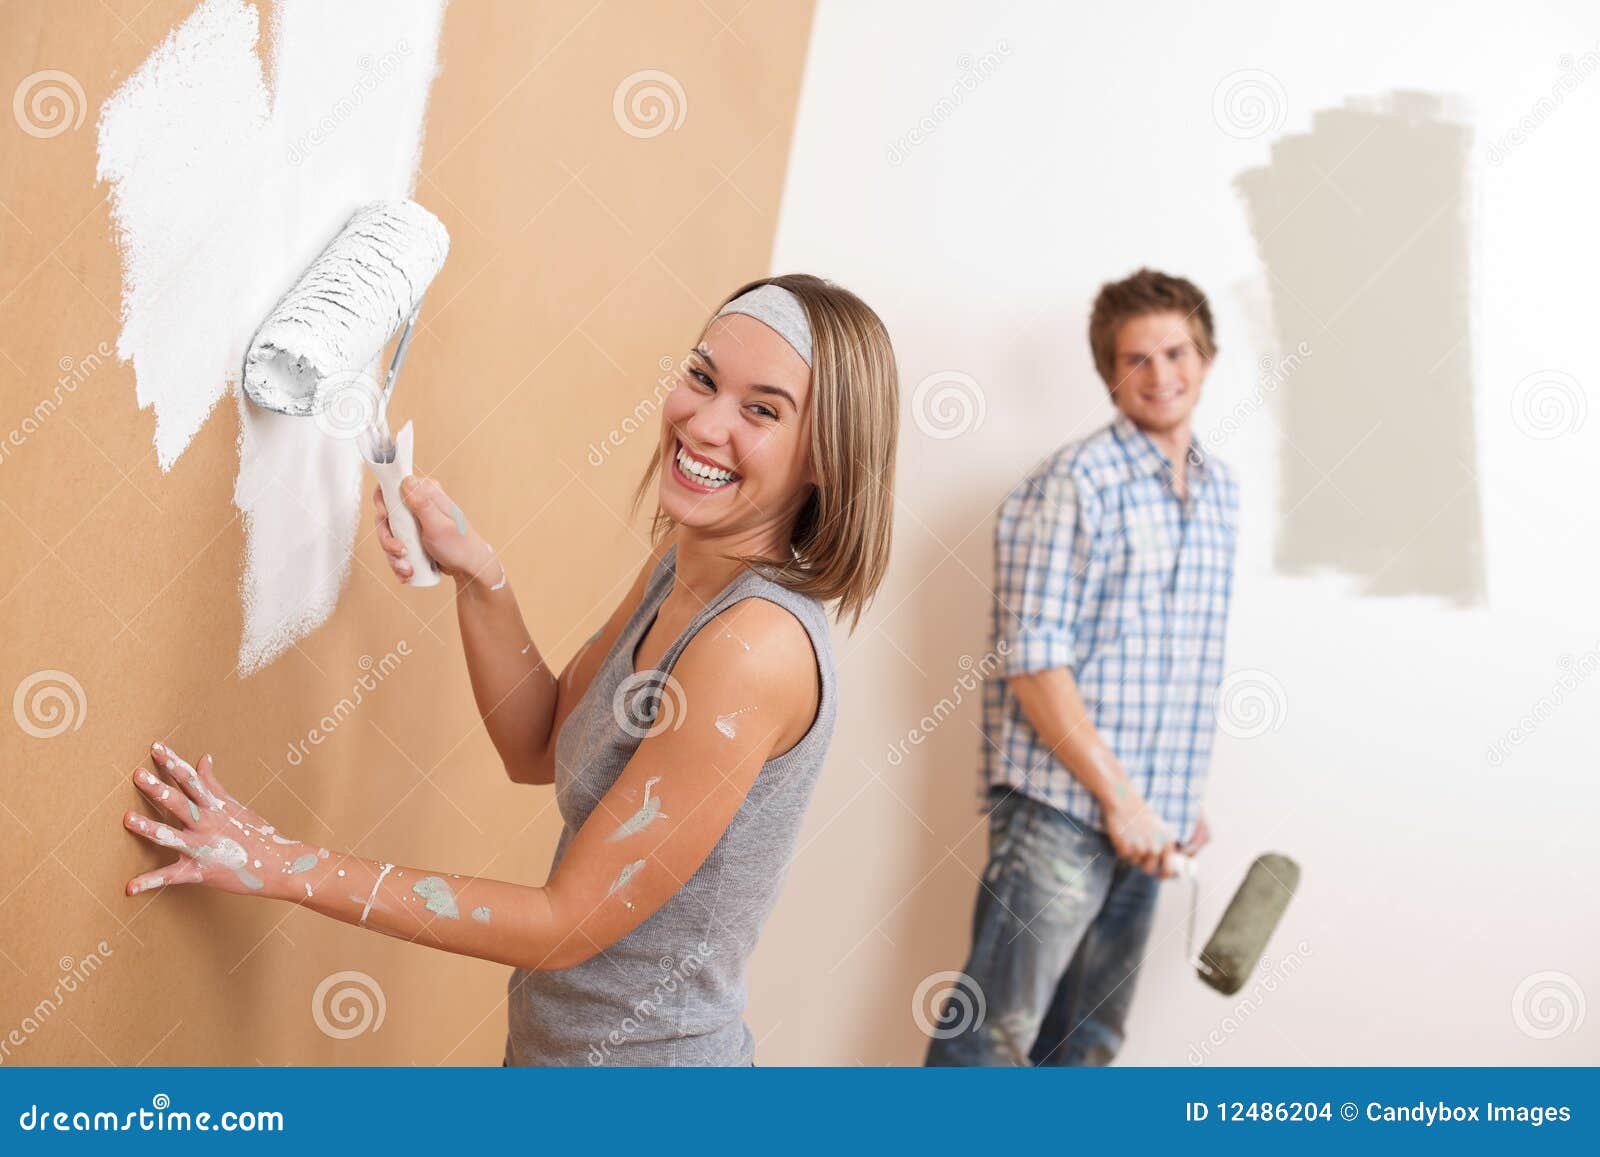 home improvement: young couple painting wall